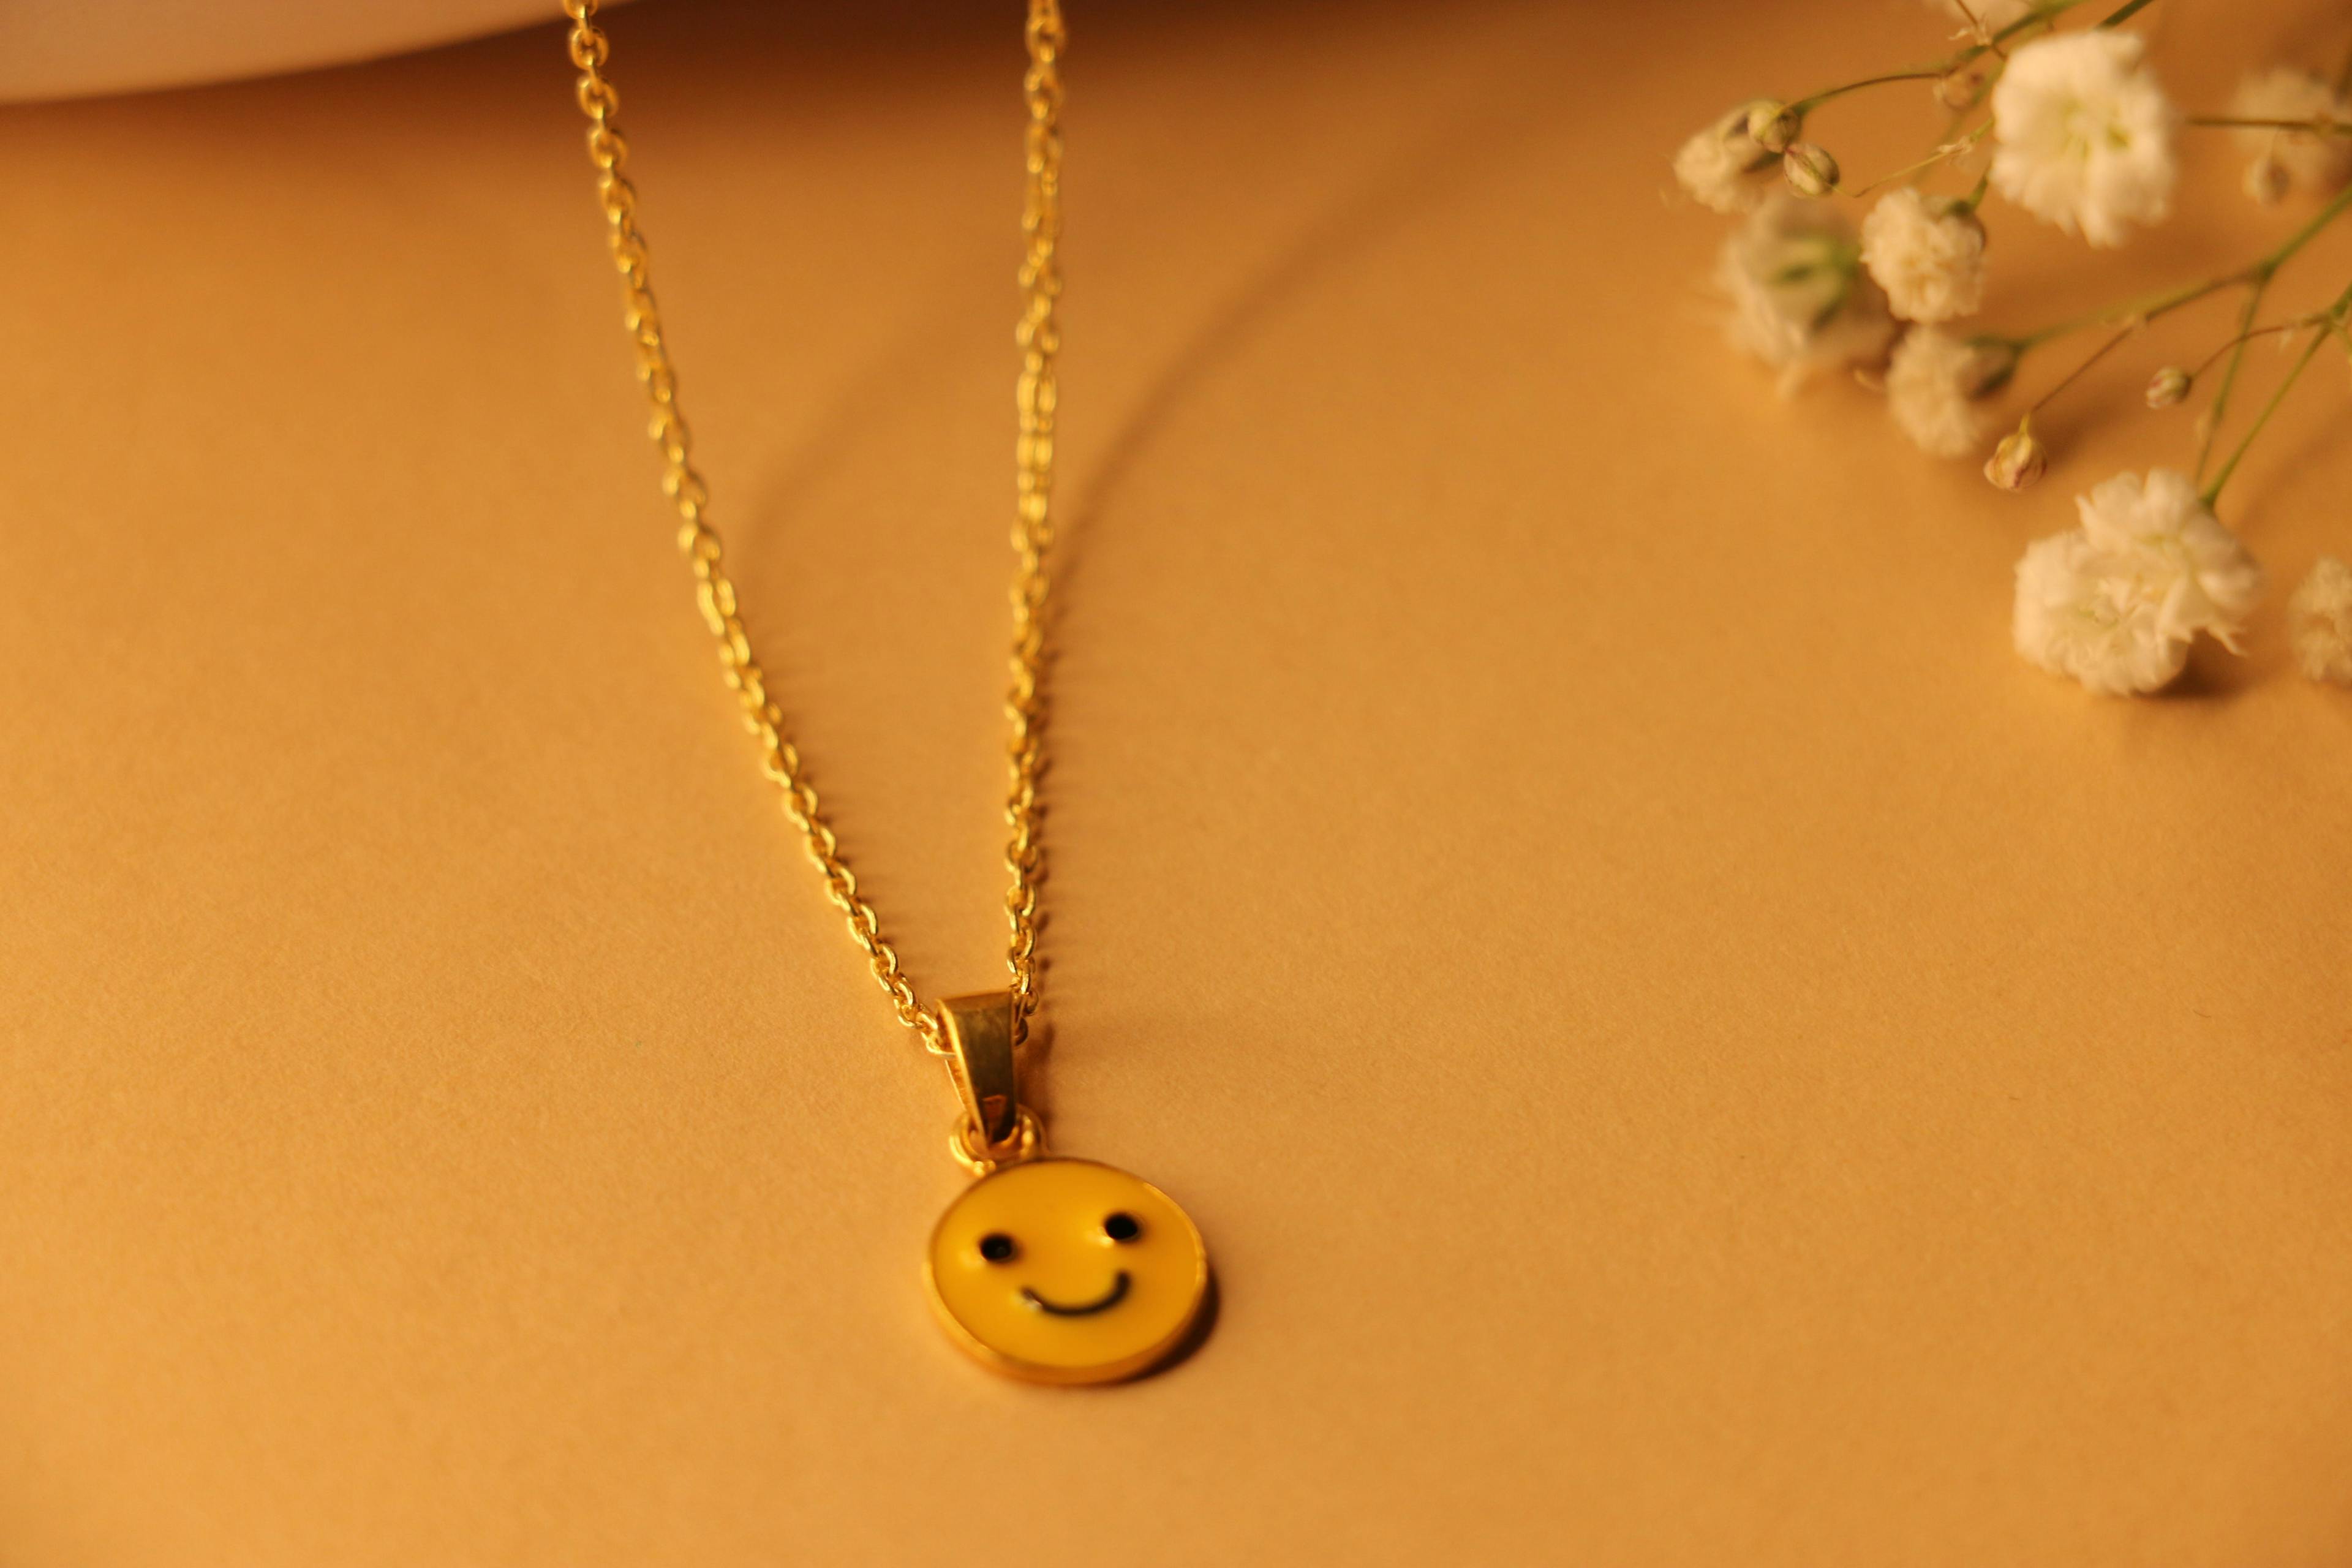 Smiley charm necklace, a product by The Jewel Closet Store